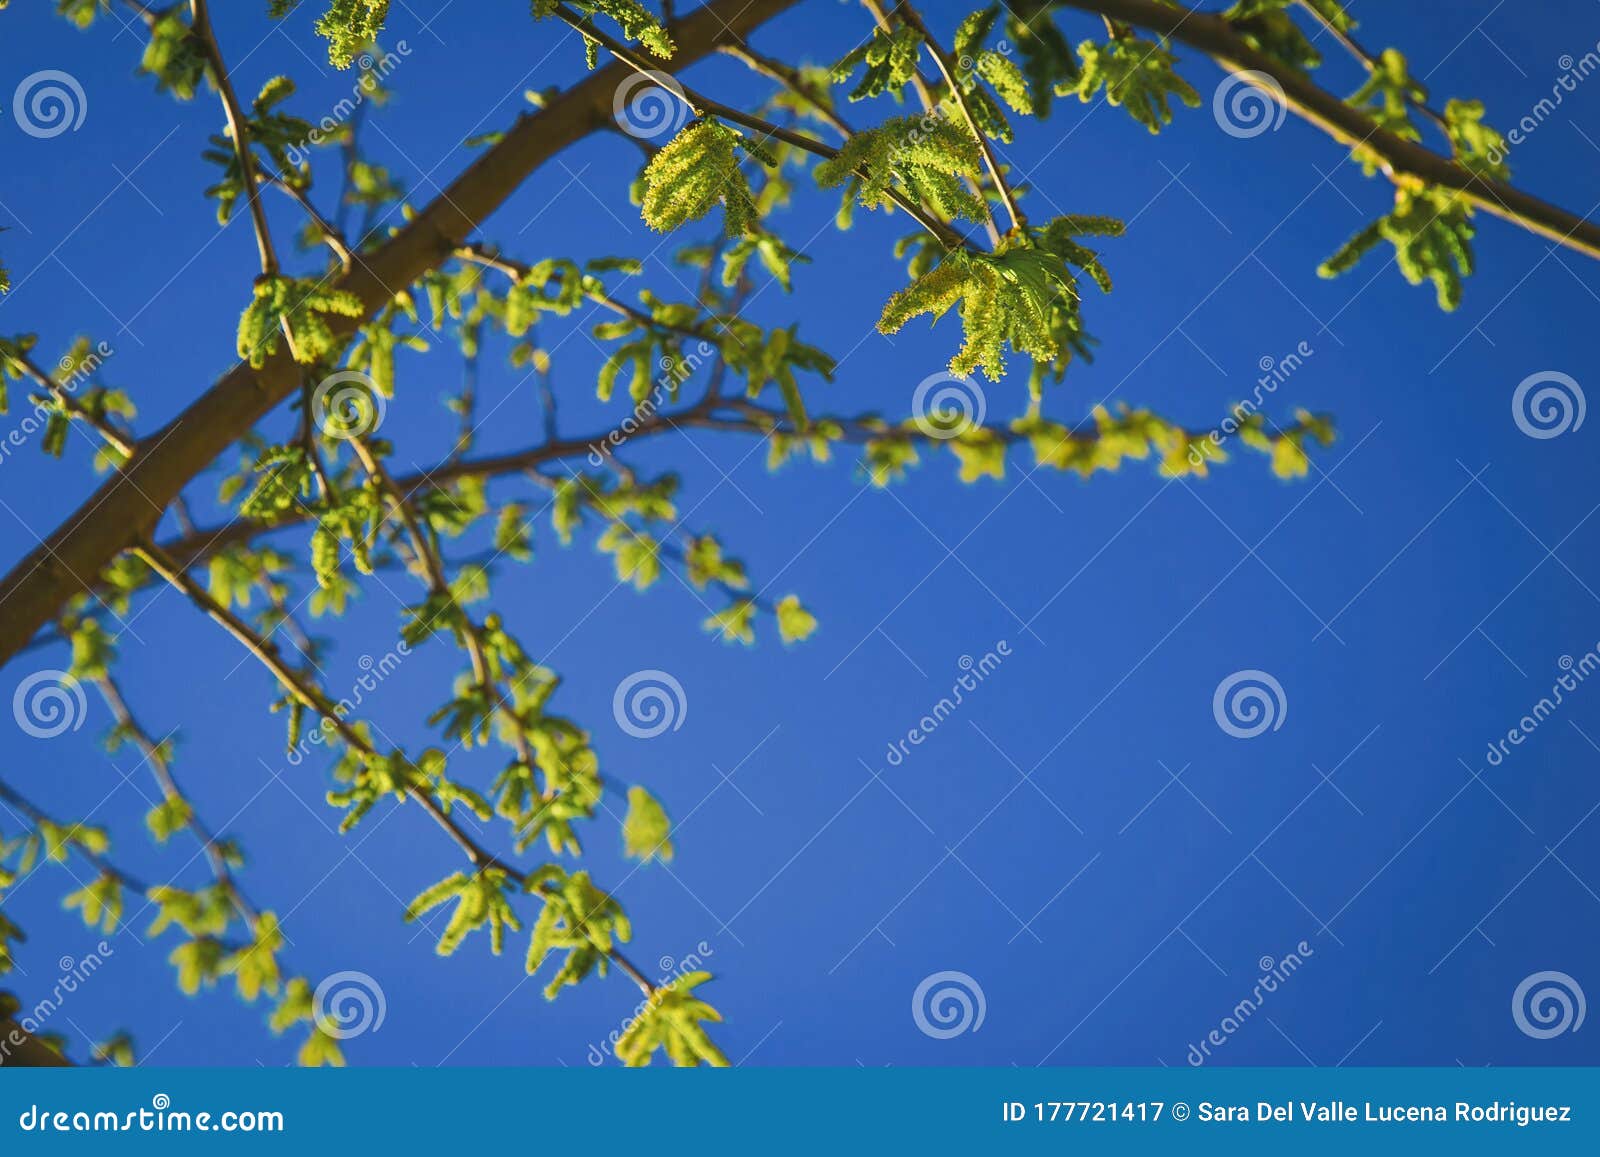 natural background of shoots of a tree blooming in the middle of spring with views towards the blue sky